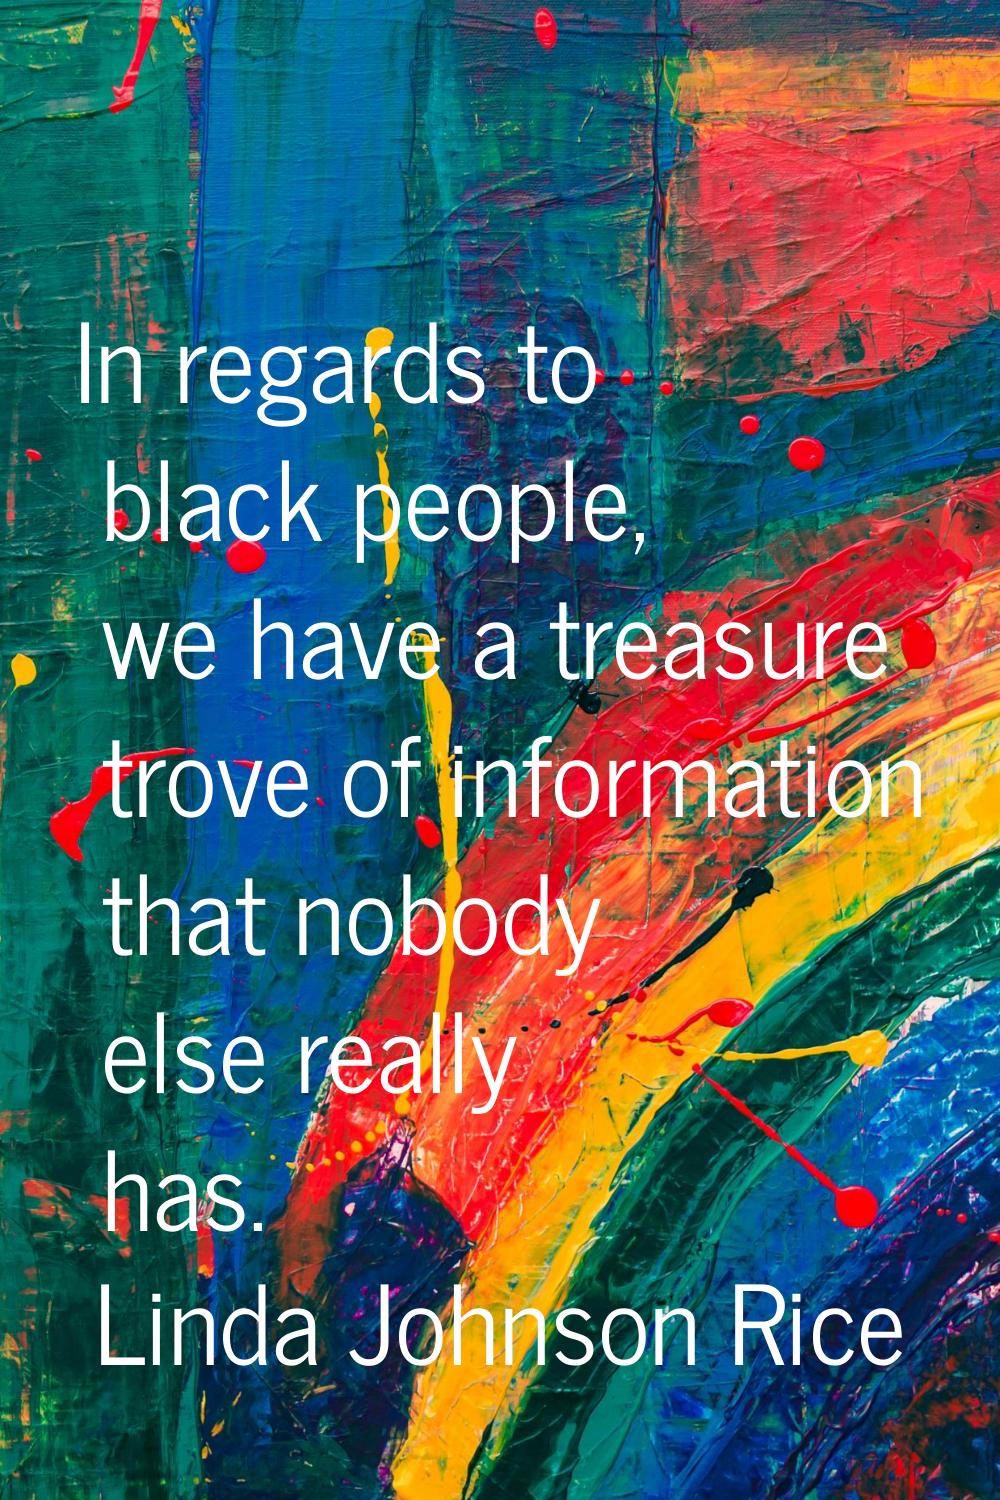 In regards to black people, we have a treasure trove of information that nobody else really has.